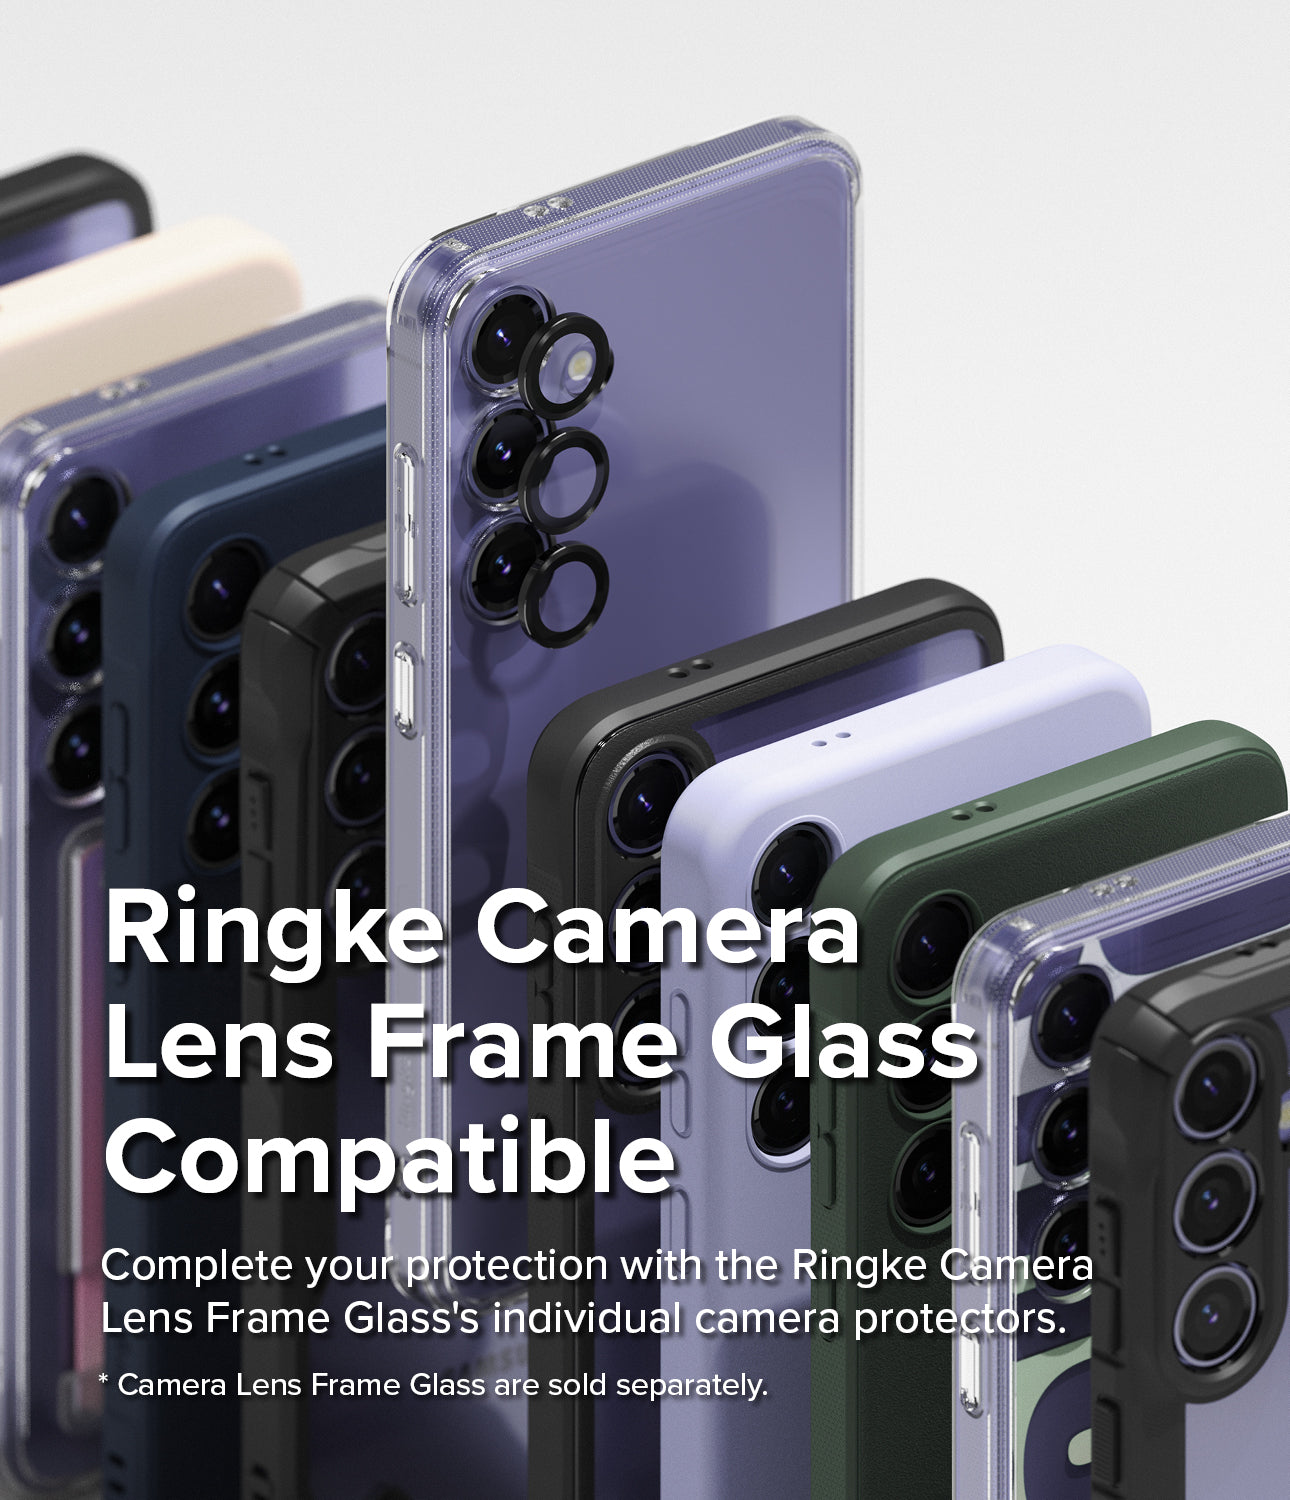 Galaxy S24 Case | Onyx Design - Camo Black - Ringke Camera Lens Frame Glass Compatible. Complete your protection with the Ringke Camera Lens Frame Glass' individual camera protectors.